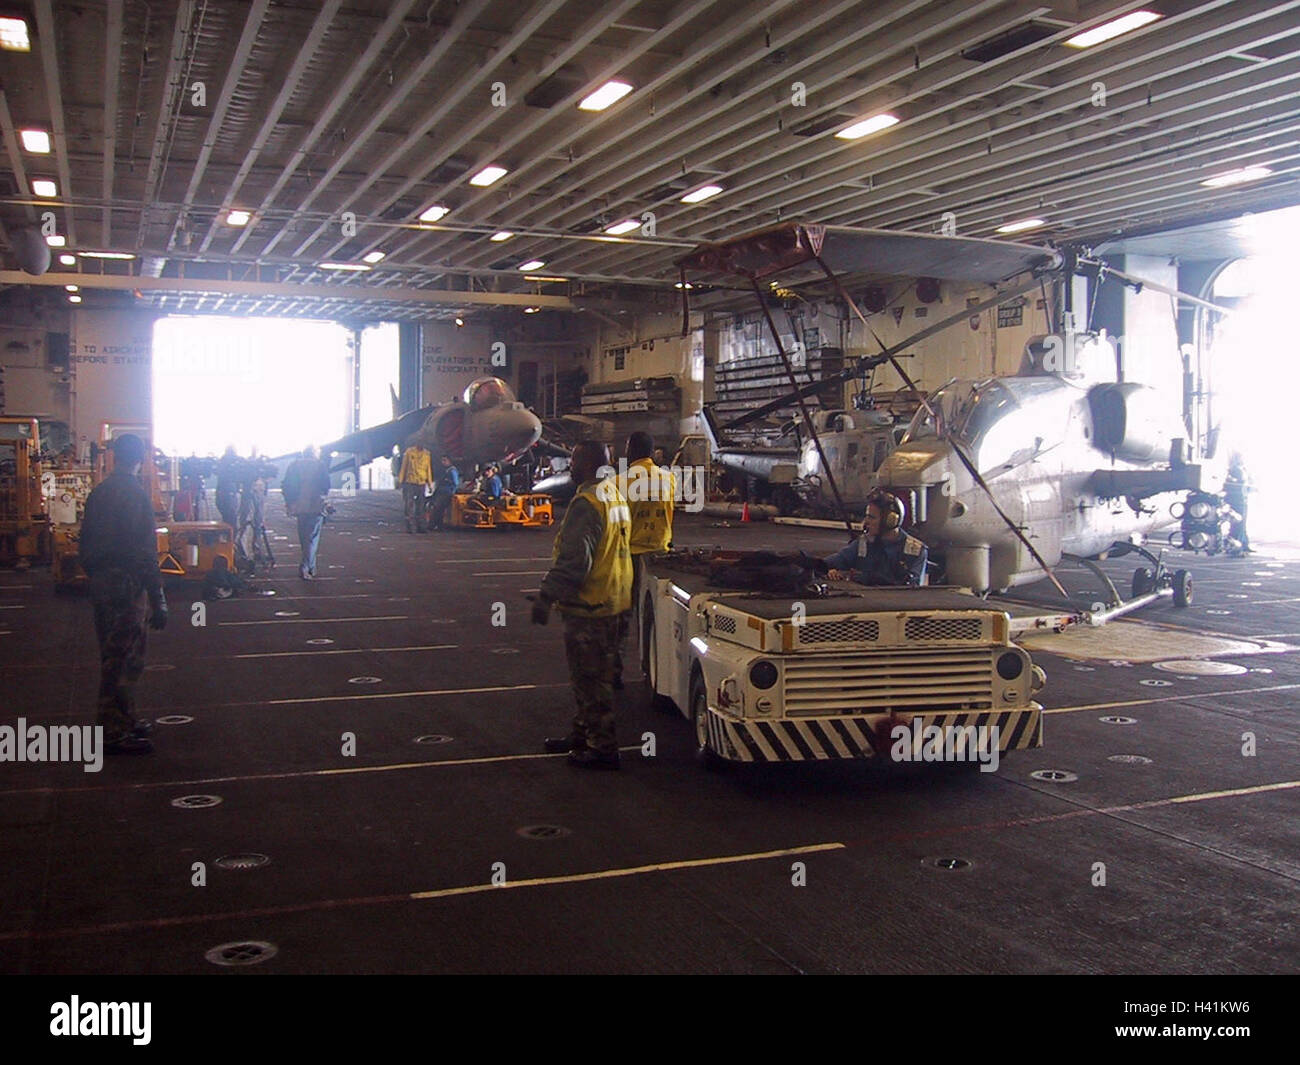 28th January 2003 Operation Enduring Freedom: a U.S. Navy Flight Deck Tractor on the hangar deck of the USS Nassau. Stock Photo